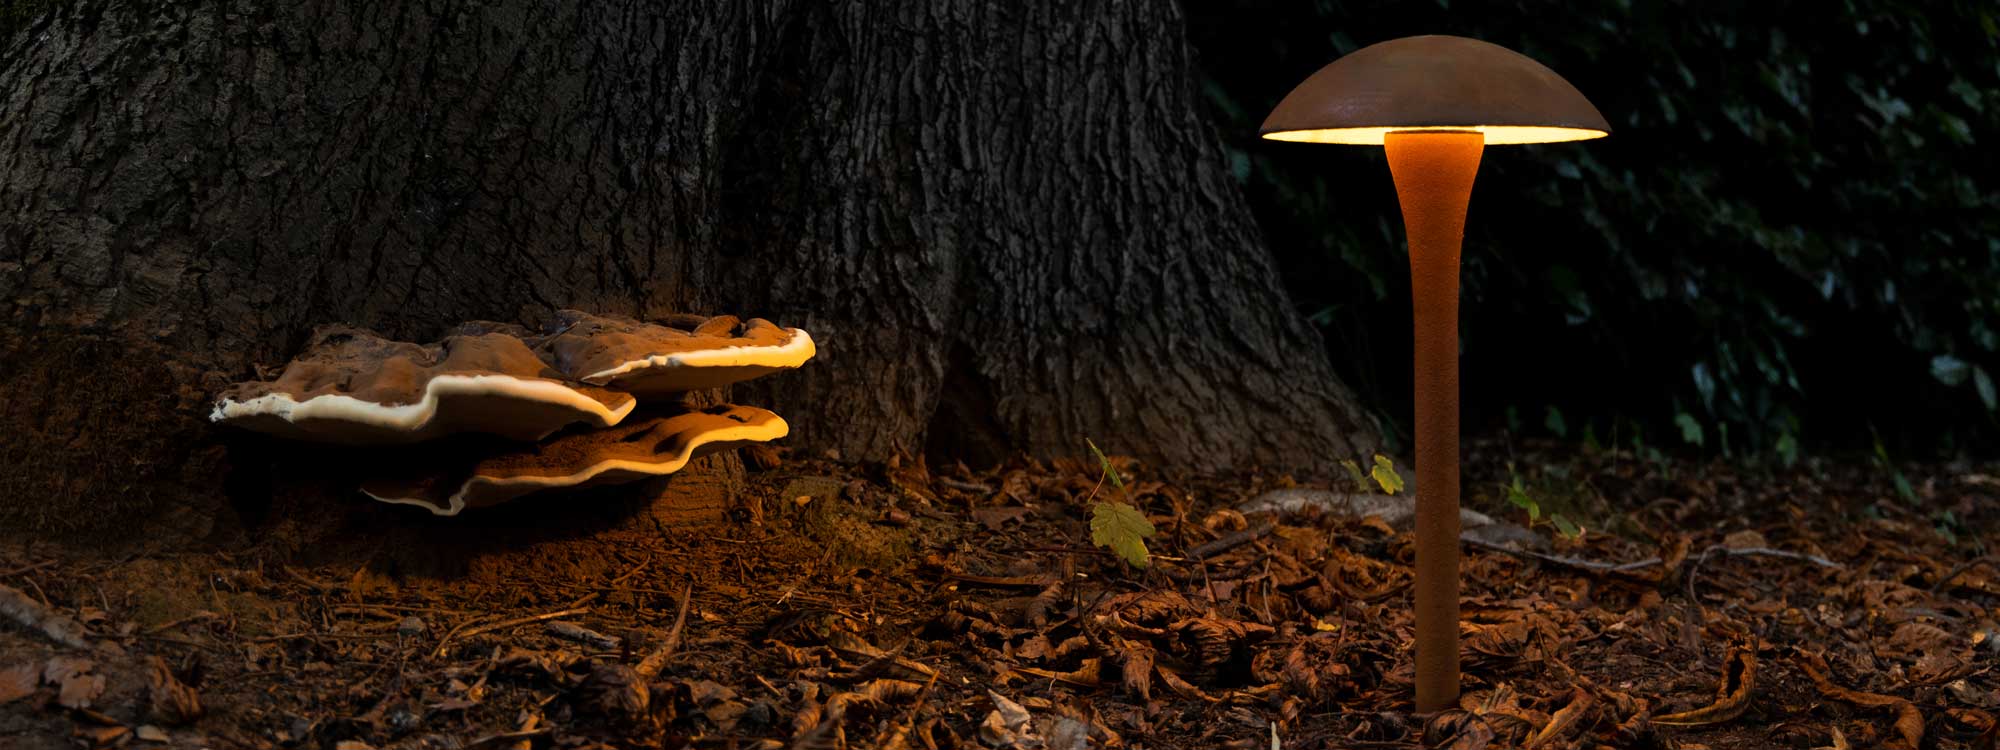 Nighttime image of Royal Botania Fungy exterior bollard light, with tree trunk and funghi growing from it